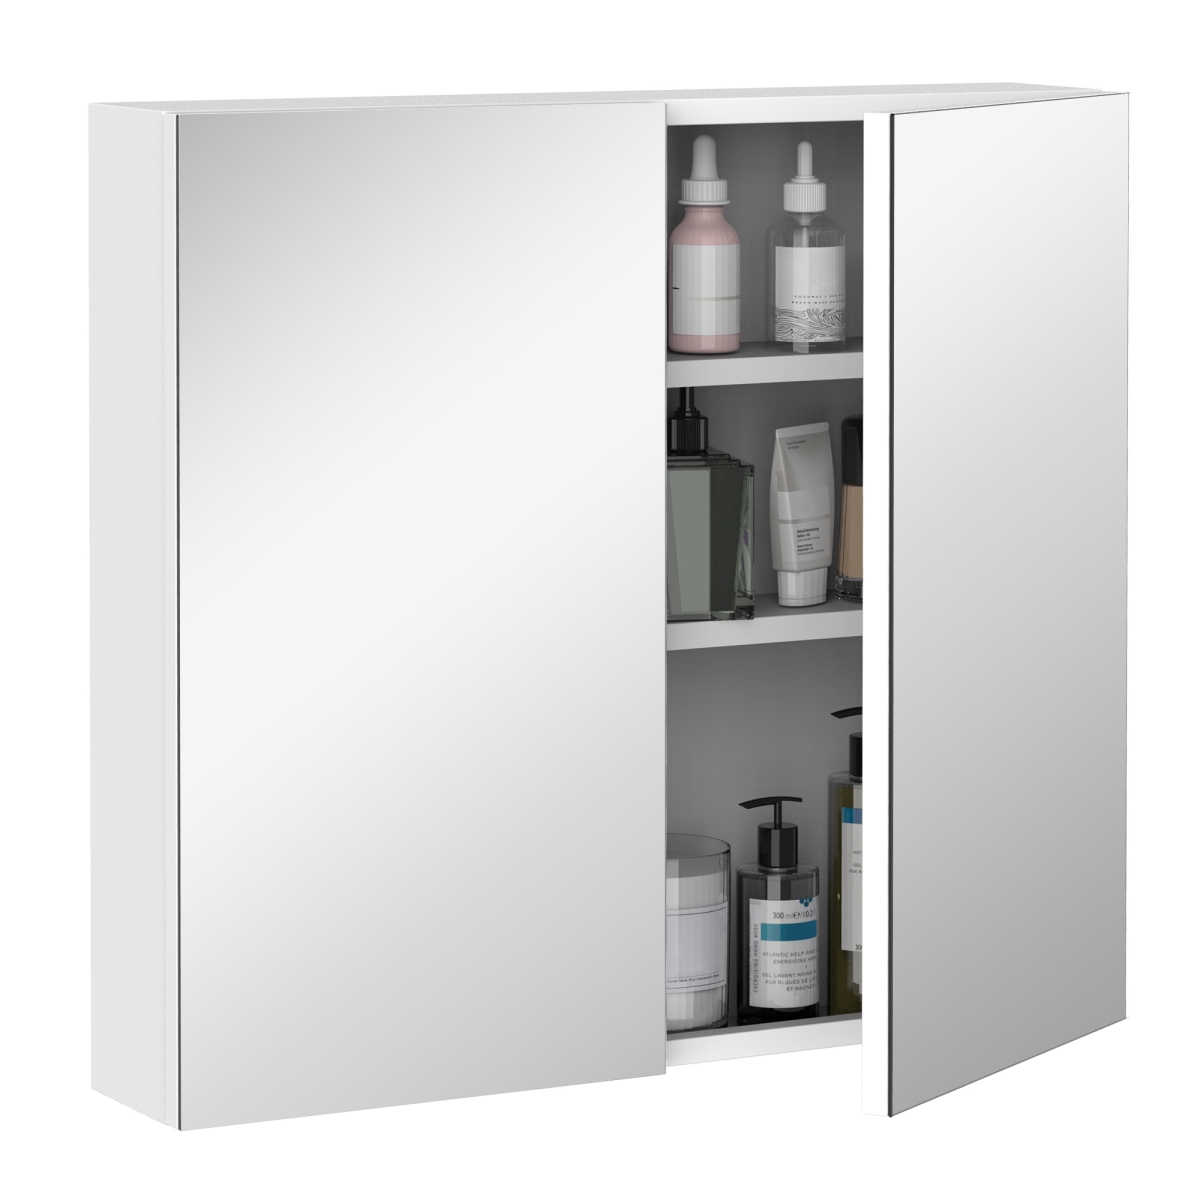 Picture of 212 Main 834-299 24 x 22 in. kleankin Bathroom Mirrored Cabinet Steel Frame Medicine Cabinet&#44; Wall-Mounted Storage Organizer with Double Doors&#44; White